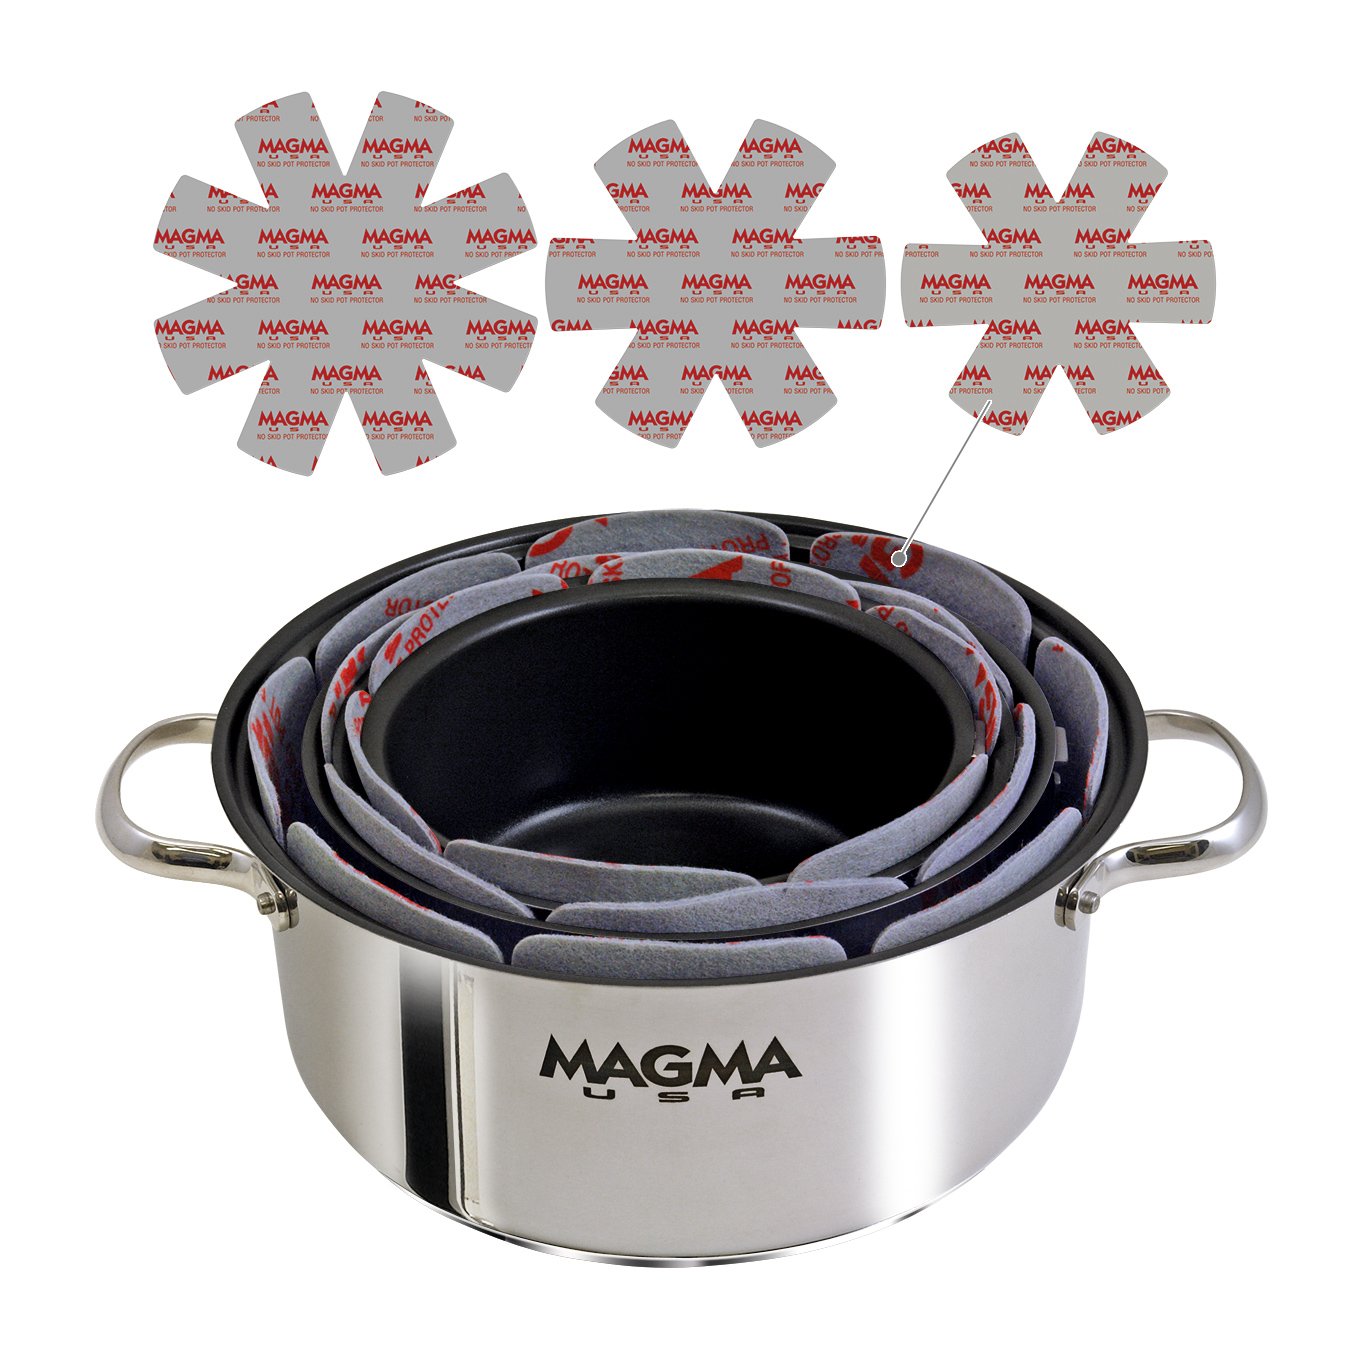 Magma 7-Piece “Nesting” Stainless Steel Induction Cookware Set